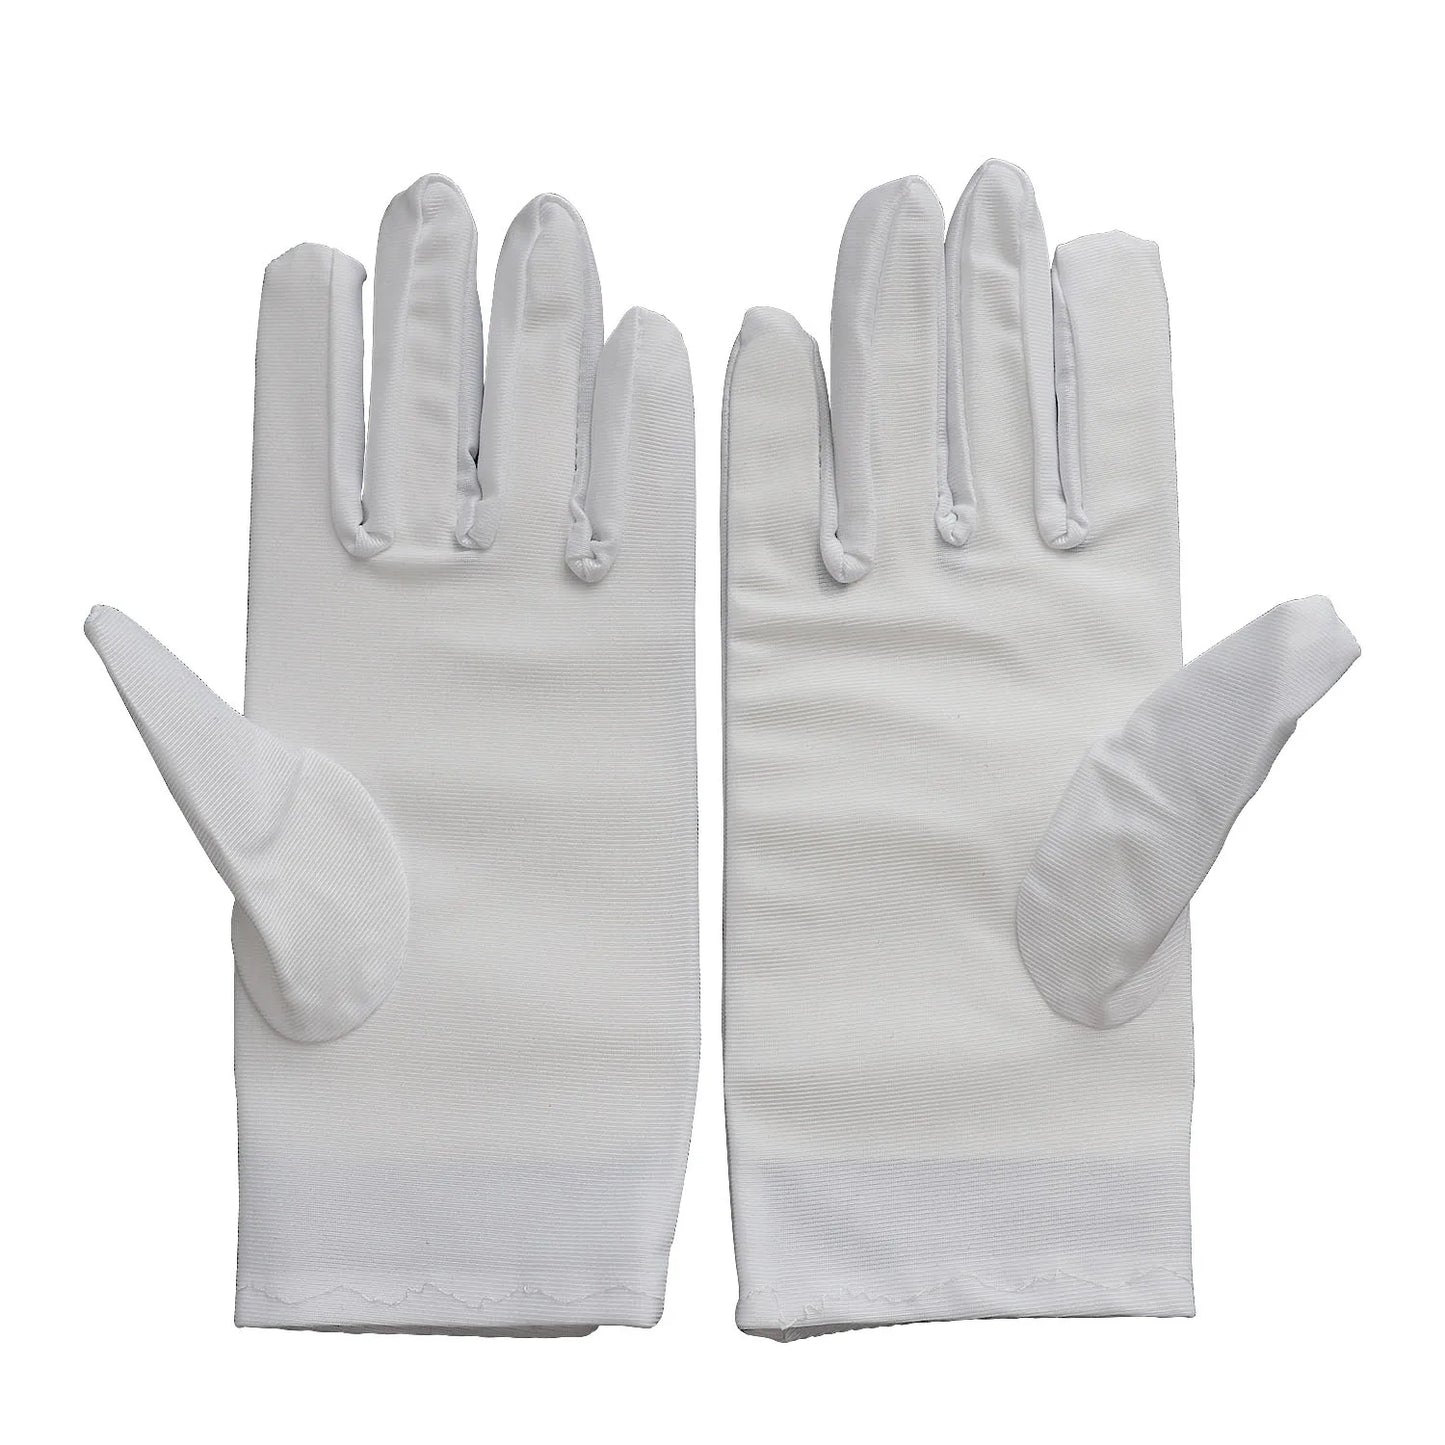 Premium 12 Pairs Cotton Gloves – Perfect for Cleaning, Serving & Moisturizing Dry Hands"